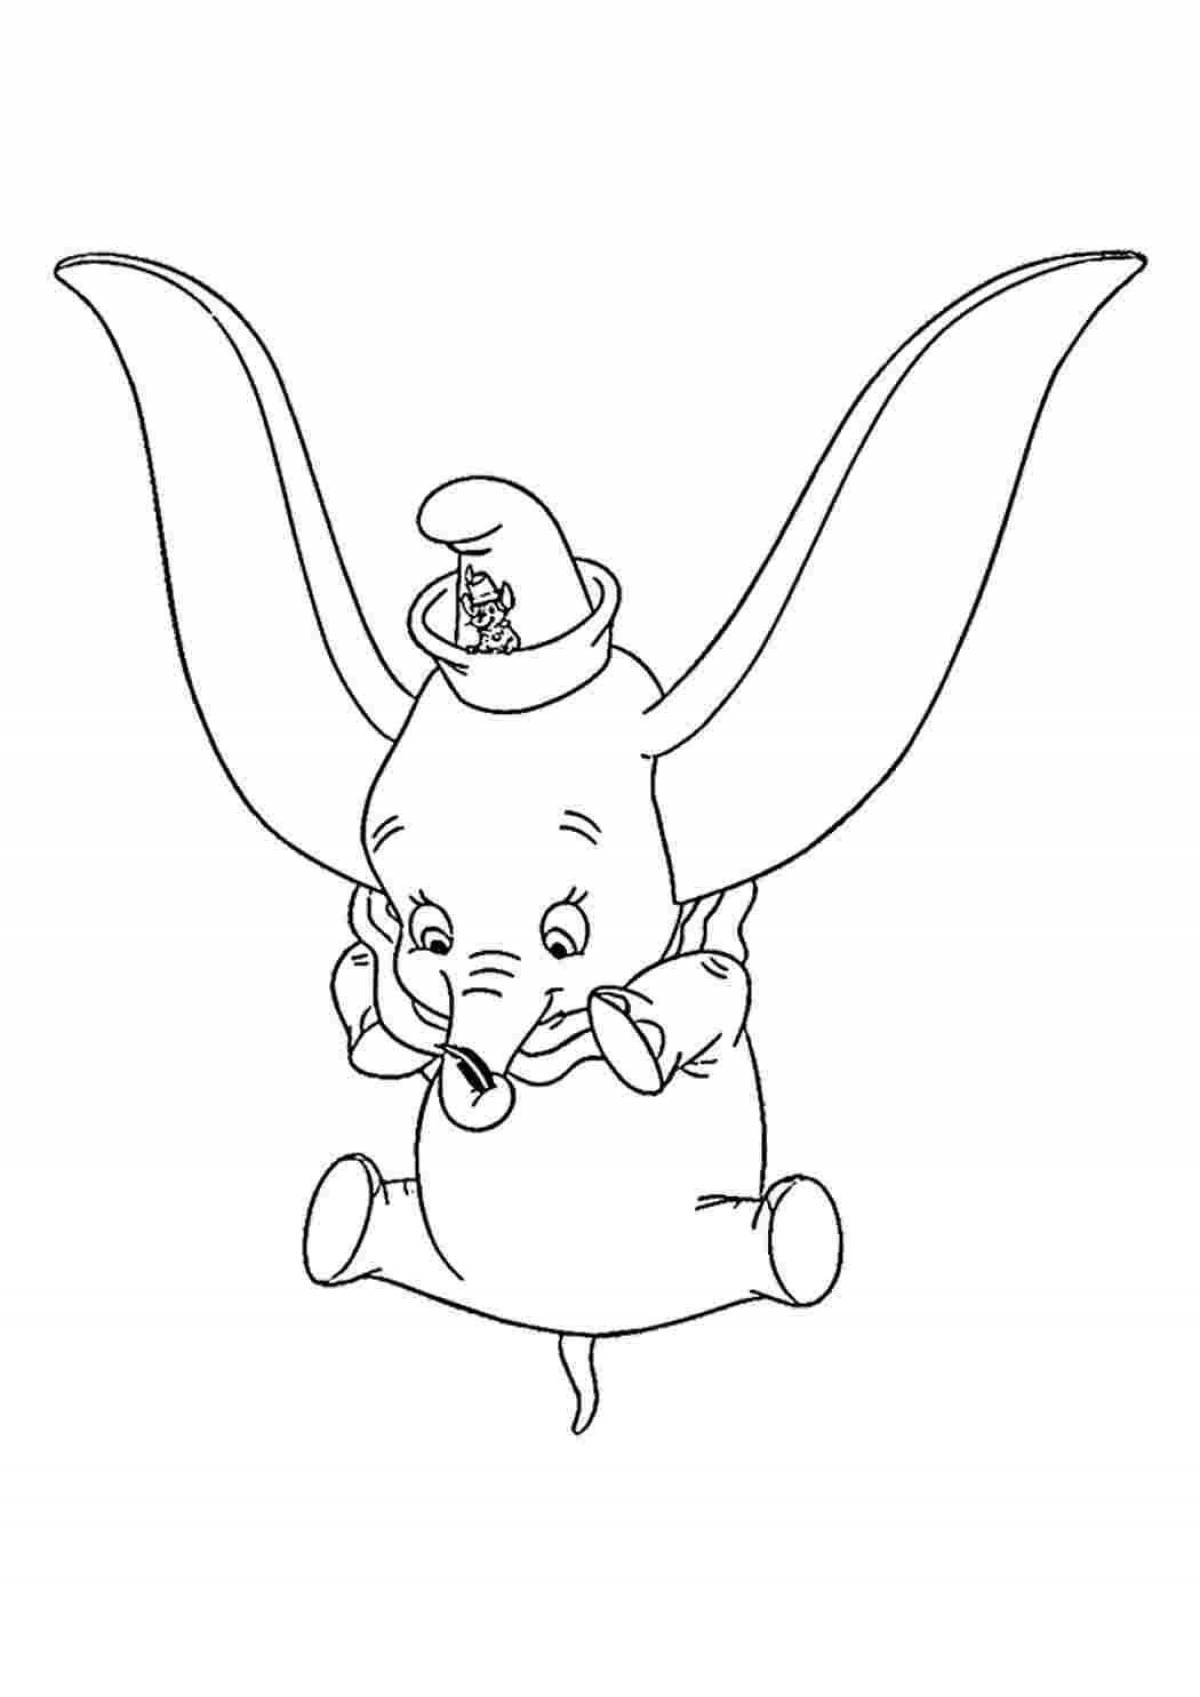 Dumbo elephant coloring page